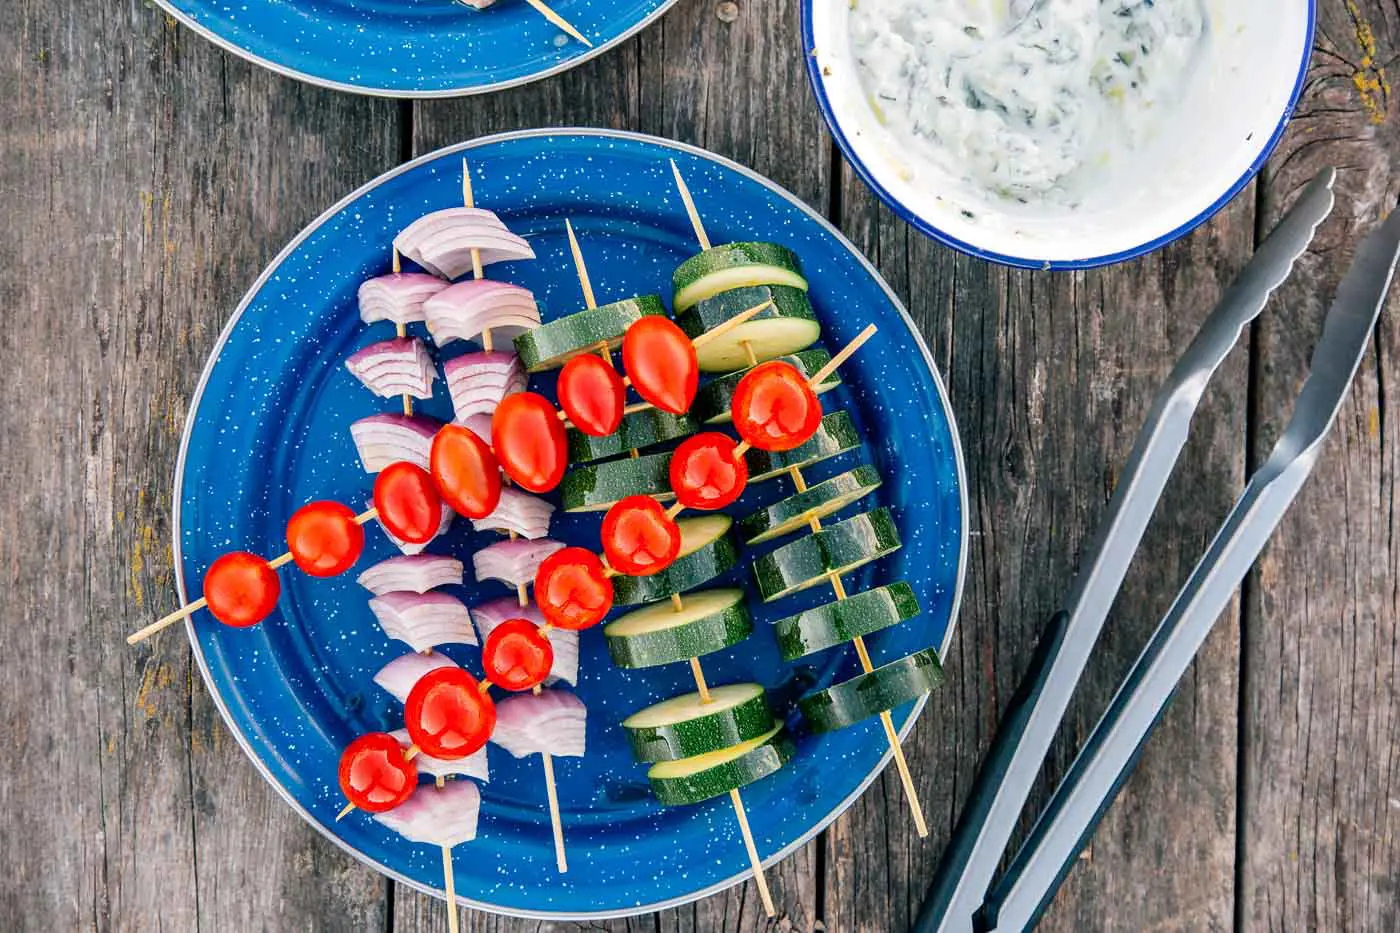 Tomatoes, red onion, and zucchini on skewers